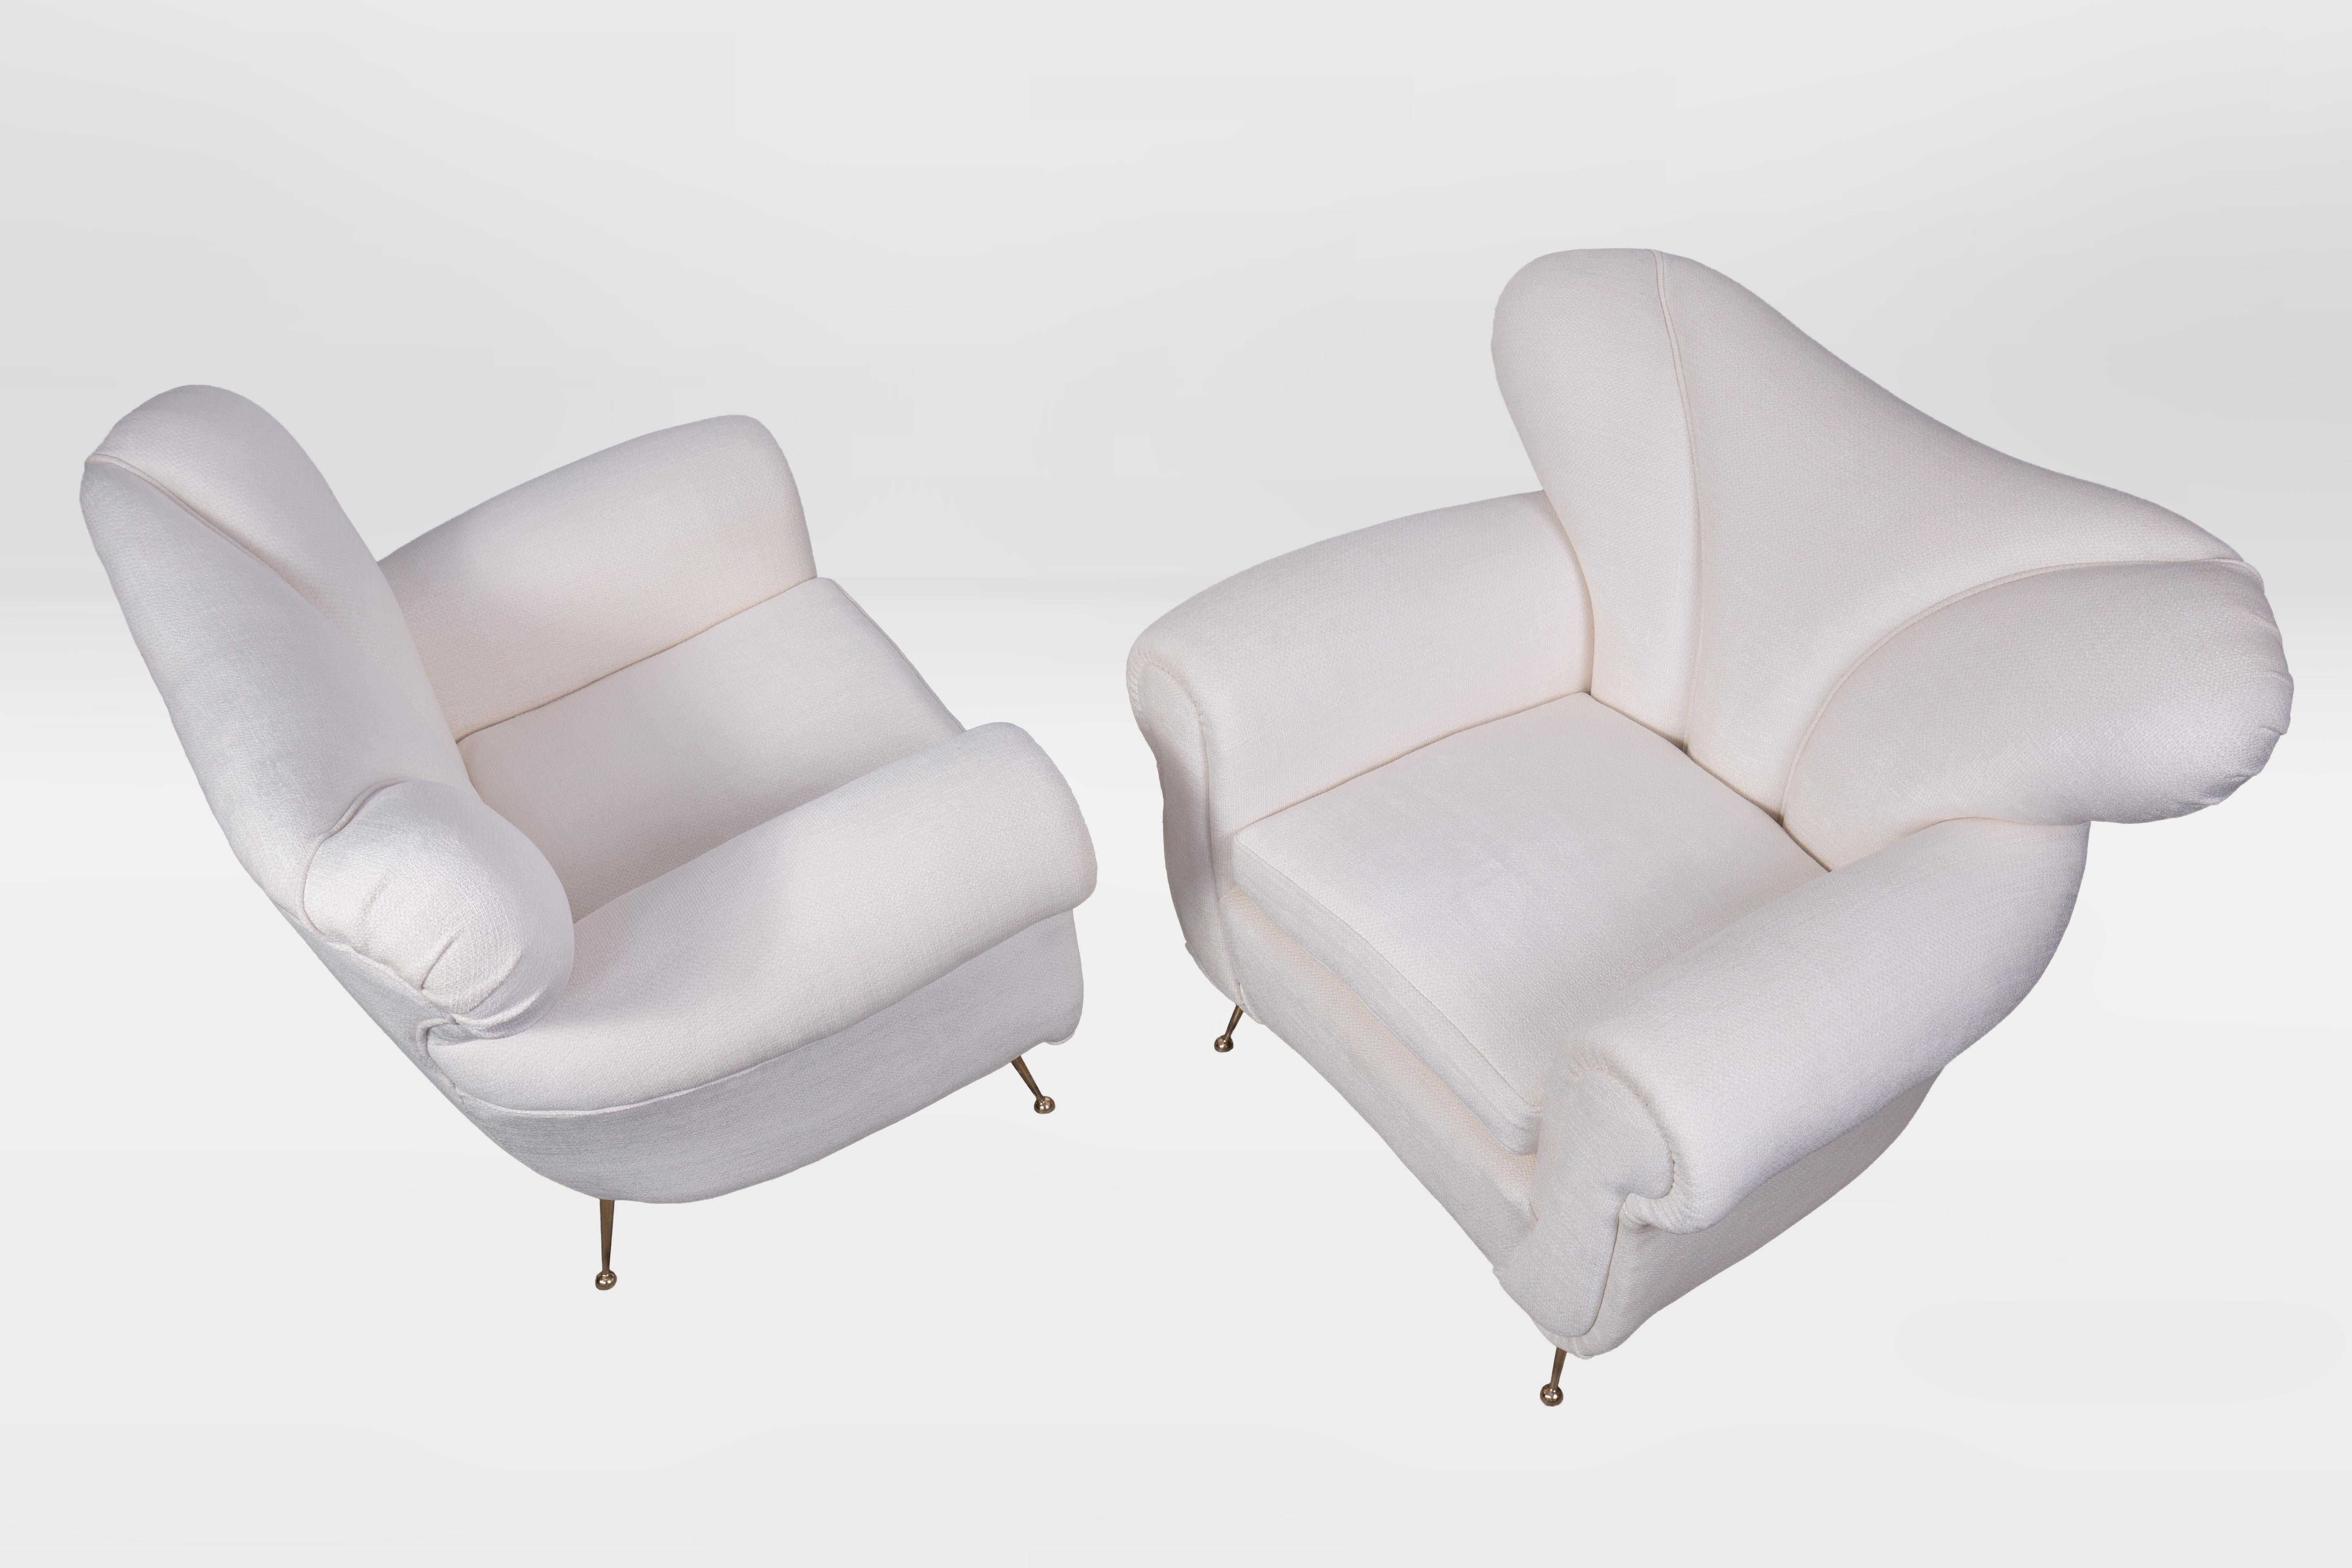 Italian Pair of Mid-Century Armchairs, Italy 1950s, Reupholstered in Pierre Frey Velvet For Sale